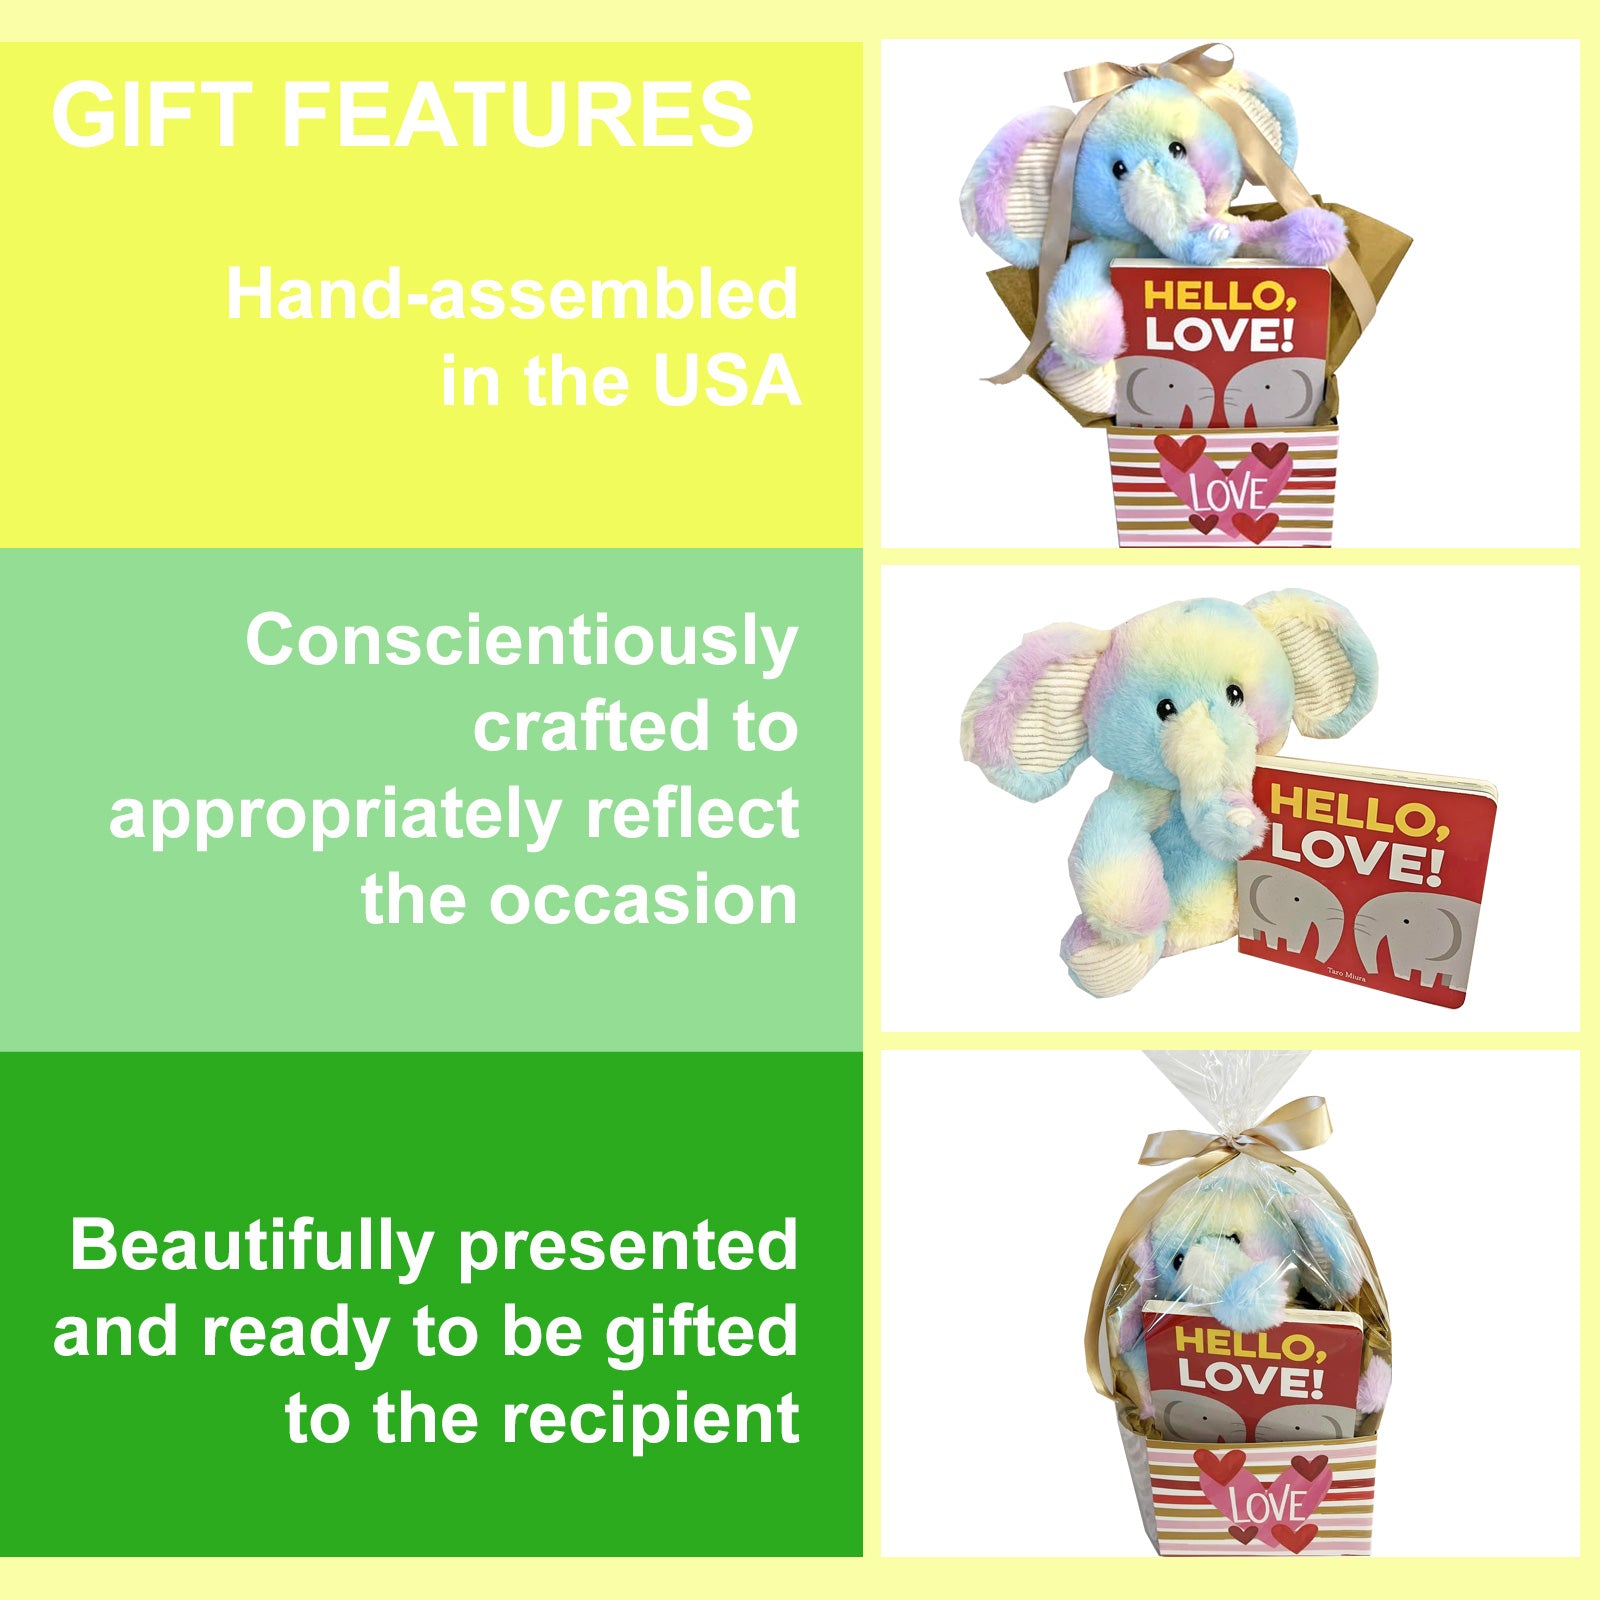 Hello Love! Baby Gift Box Featuring Elephants a Gender Neutral Baby Gift for Baby Boys and Baby Girls